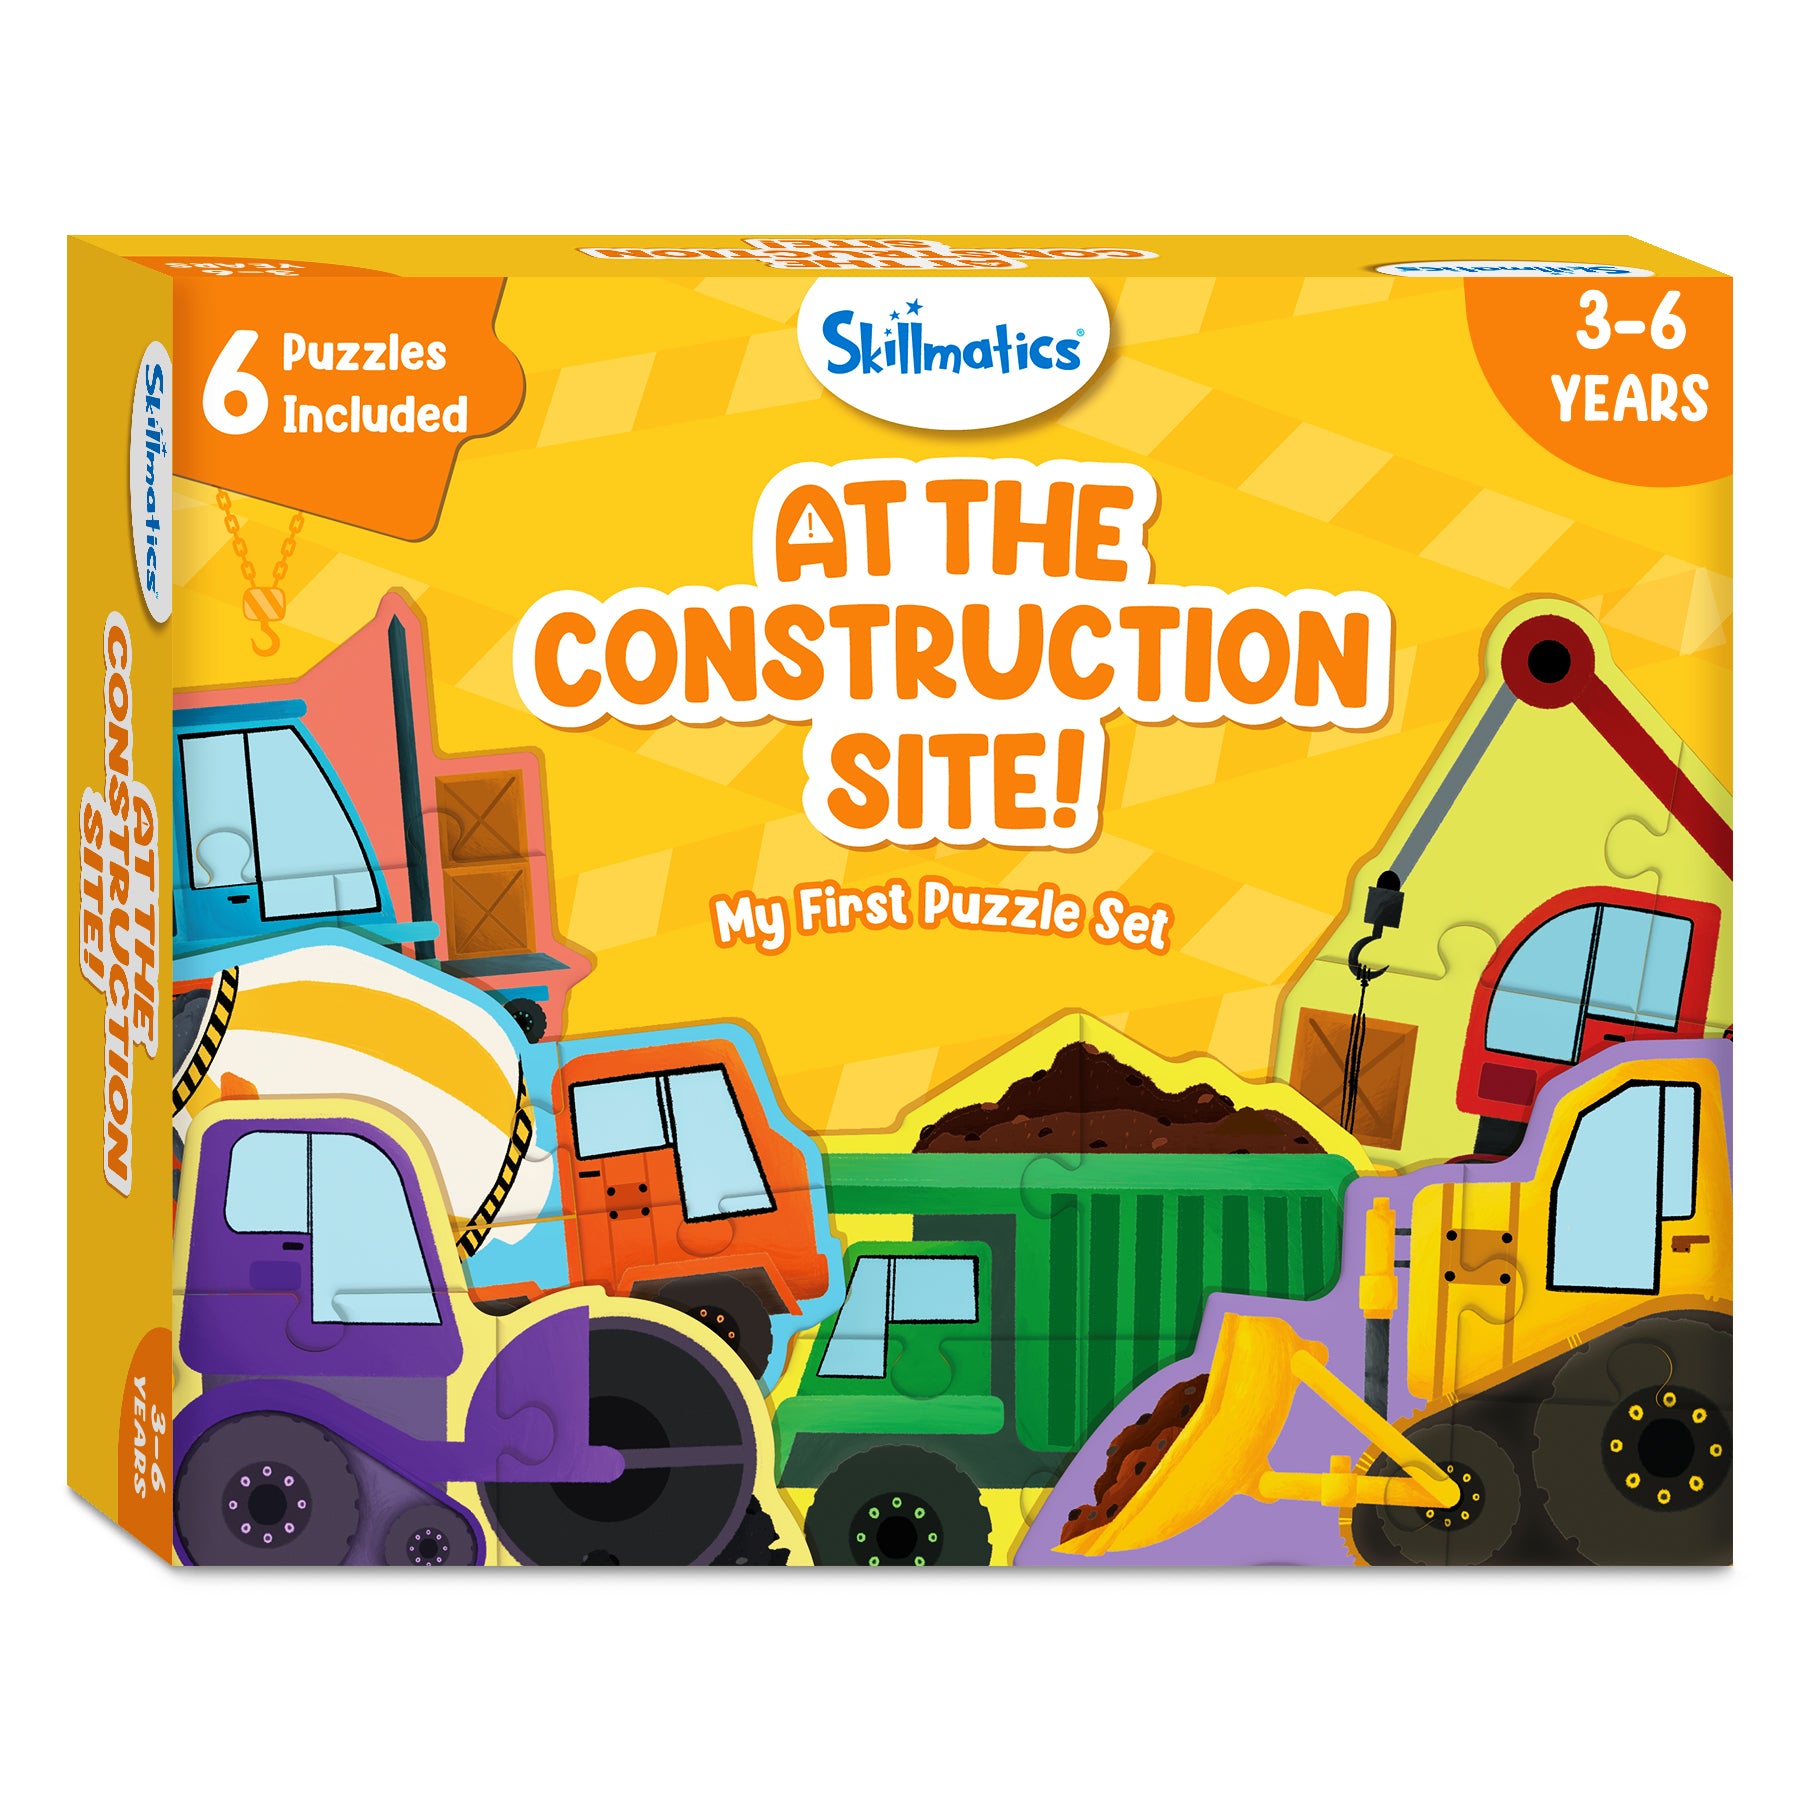 Skillmatics My First Puzzle Set - 21 Piece Construction Vehicles Jigsaw Puzzles, Educational Toddler Toy, Gifts For Kids Ages 3 To 6